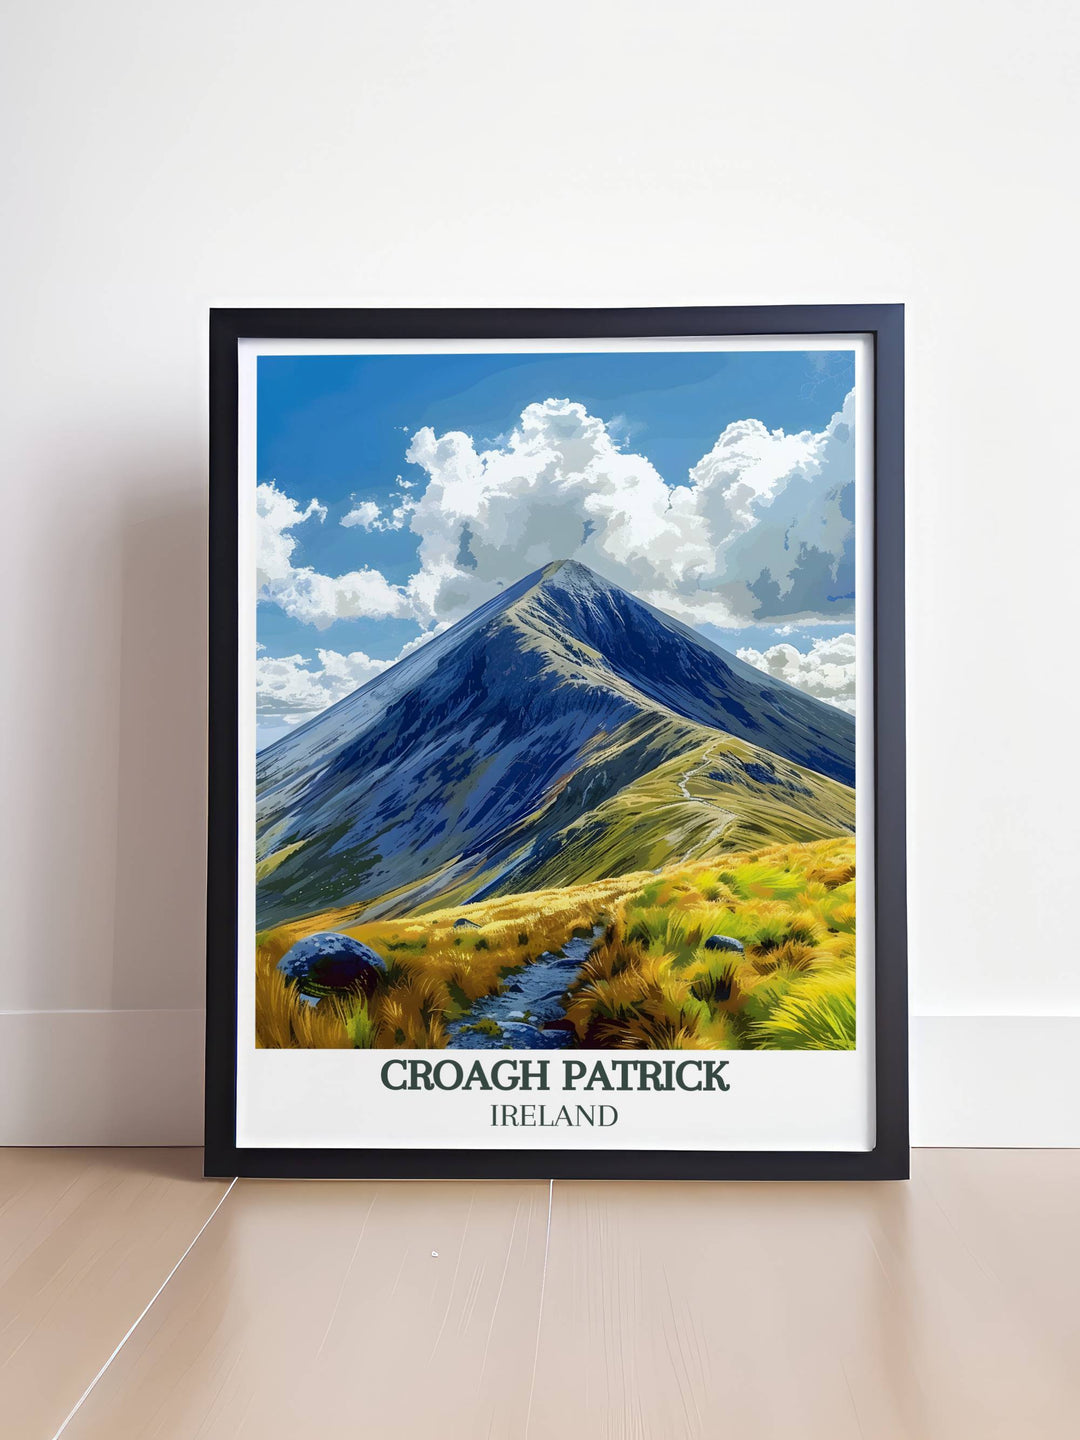 Celebrate Irish heritage with this Ireland travel print featuring Croagh Patrick Summit and the iconic Saint Patrick statue. This artwork beautifully captures the essence of Westport Ireland perfect for home decor.